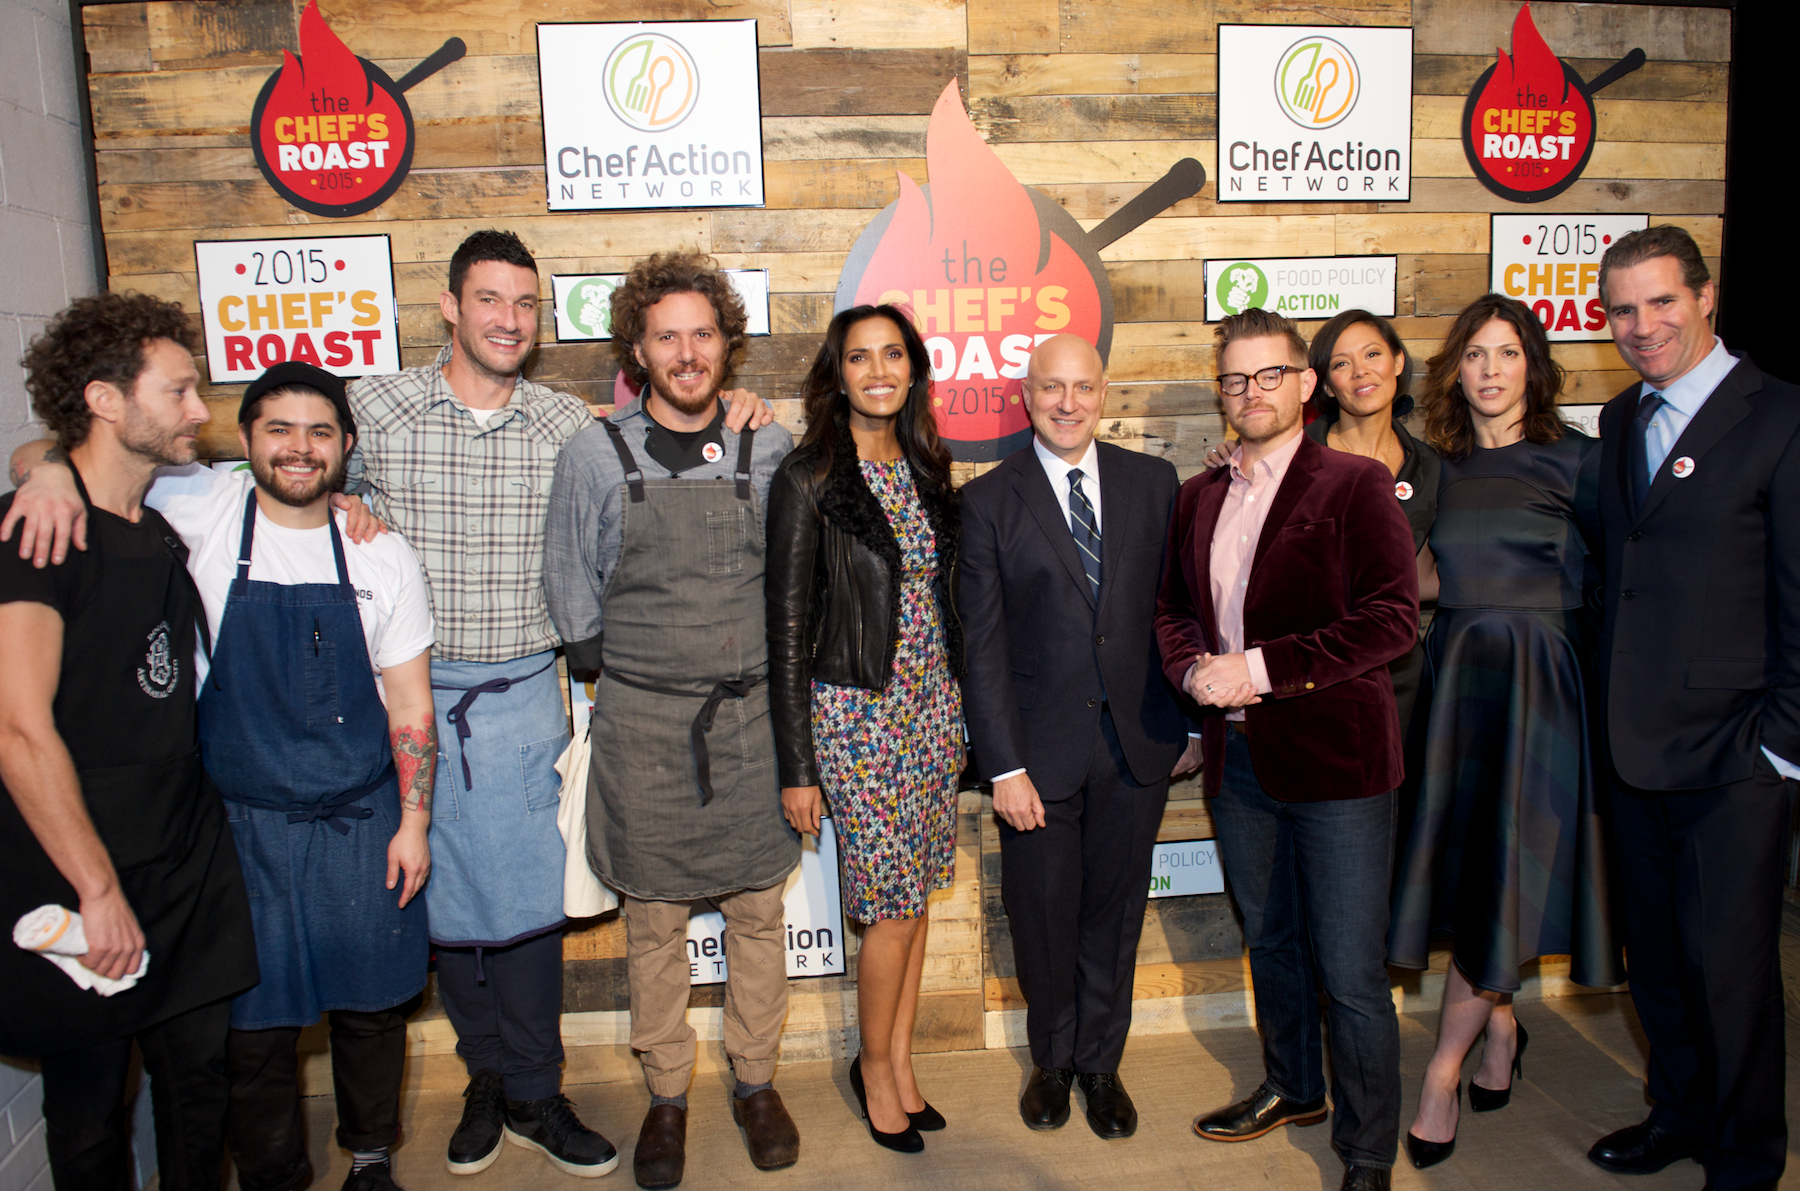 Monday night, Bravo "Top Chef" host Padma Lakshmi, Chef Richard Blais and Chef Kerry Heffernan were on hand to roast Chef Tom Colicchio at the 2nd Annual Chef’s Roast at Union Market in Washington, D.C. to benefit the Chef Action Network (CAN) and Food Policy Action (FPA).  (Ben Droz)